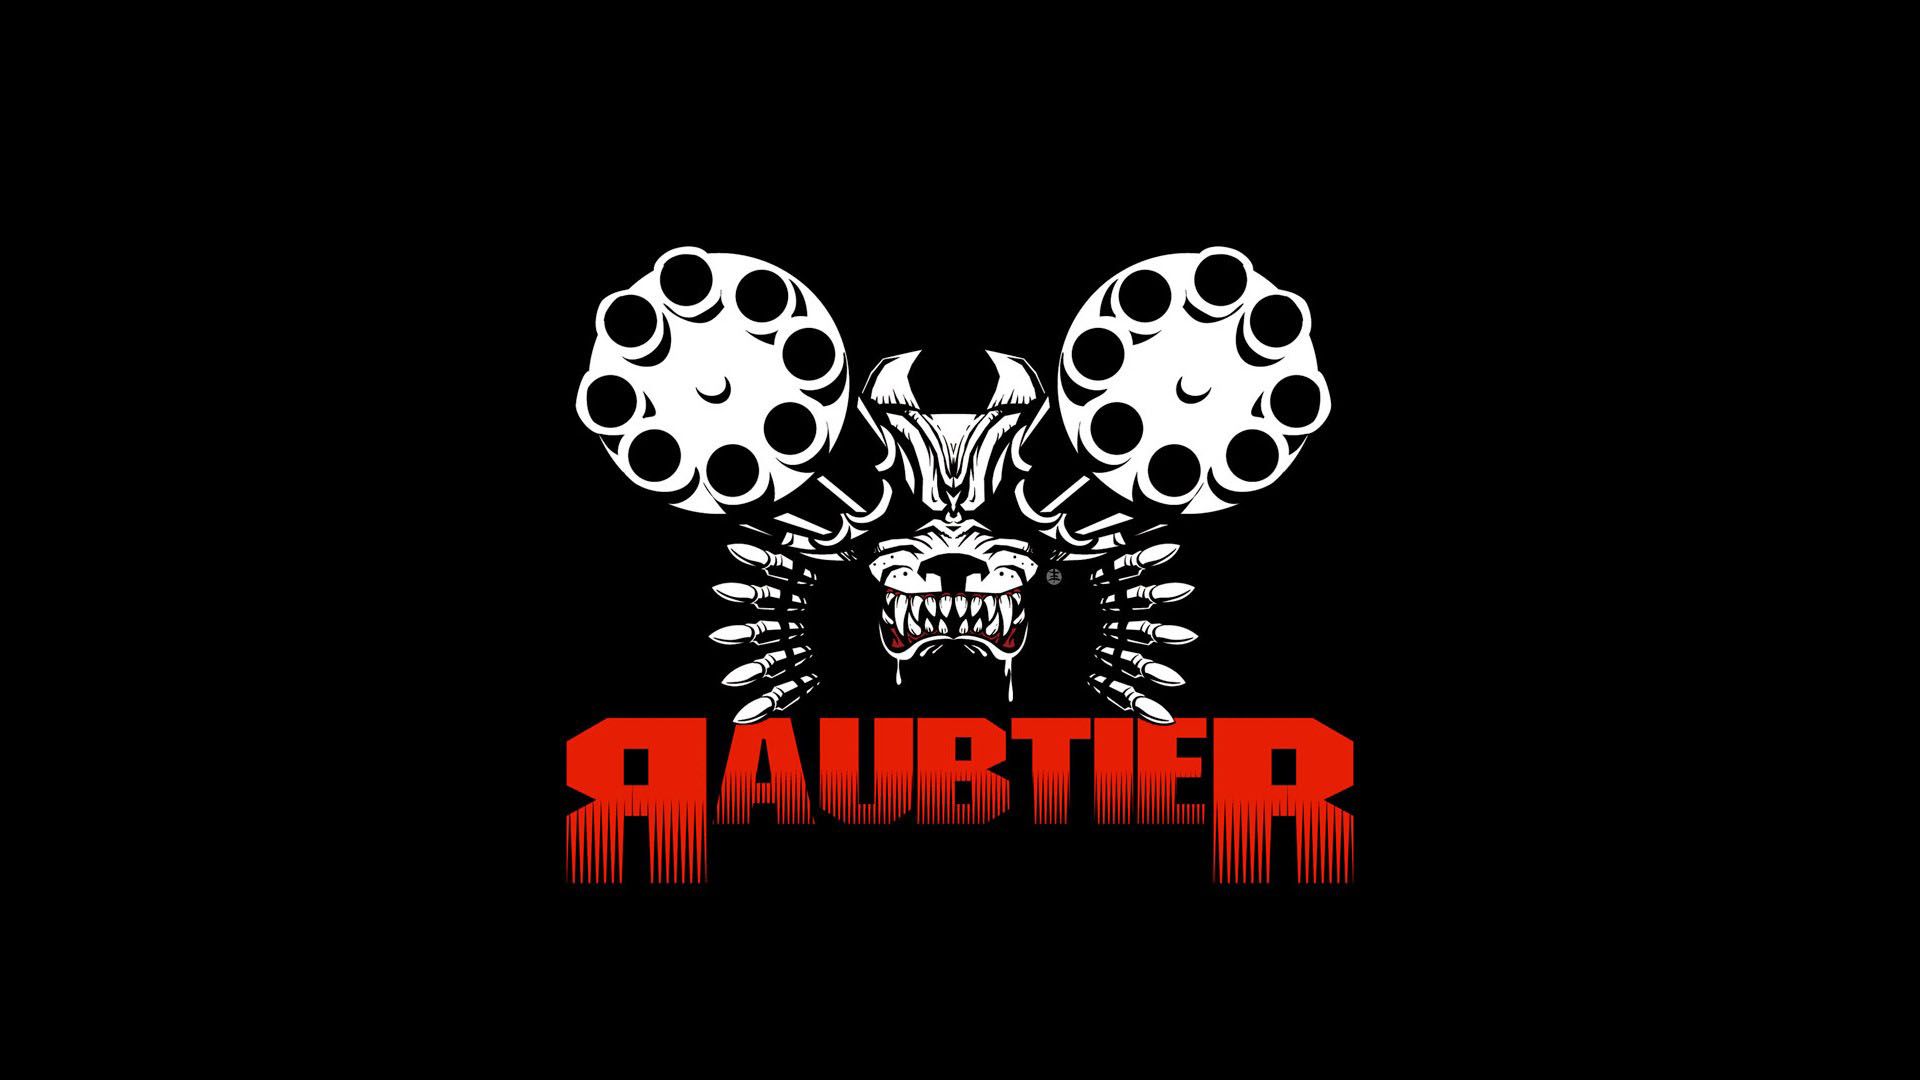 Raubtier HD download for free